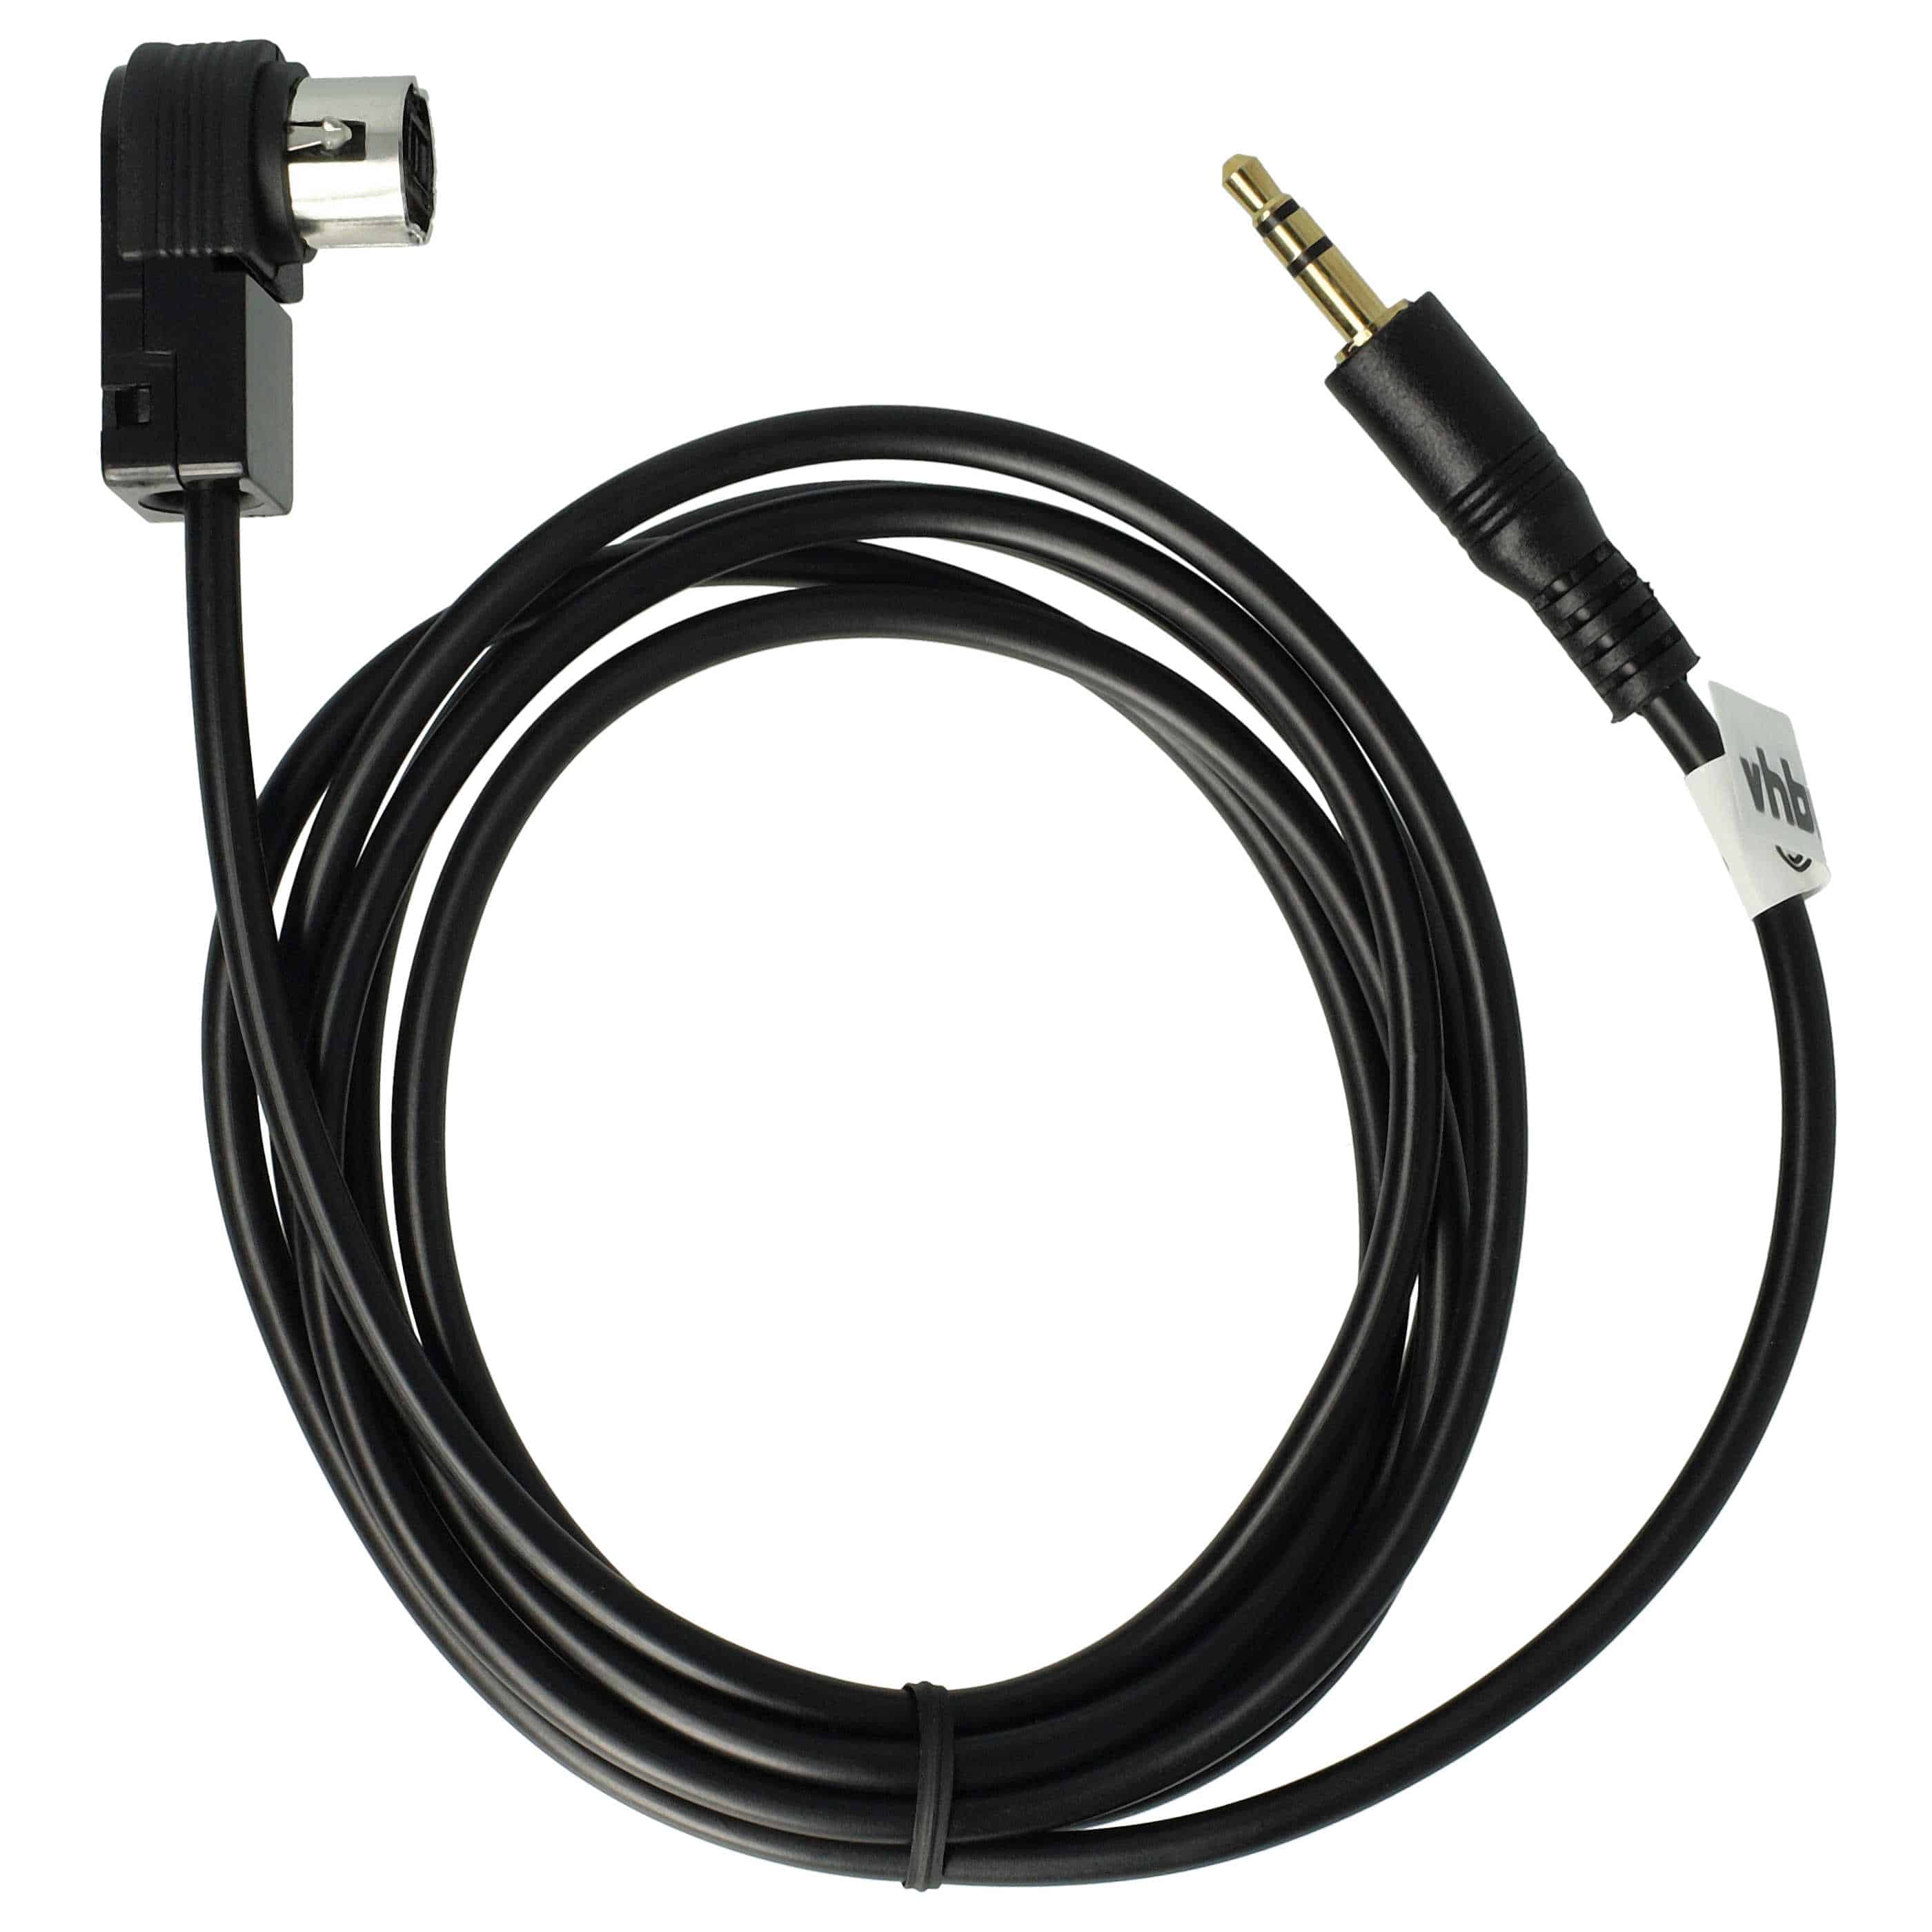 AUX Audio Adapter Cable as Replacement for Alpine KCA-235B Car Radio - 60 cm